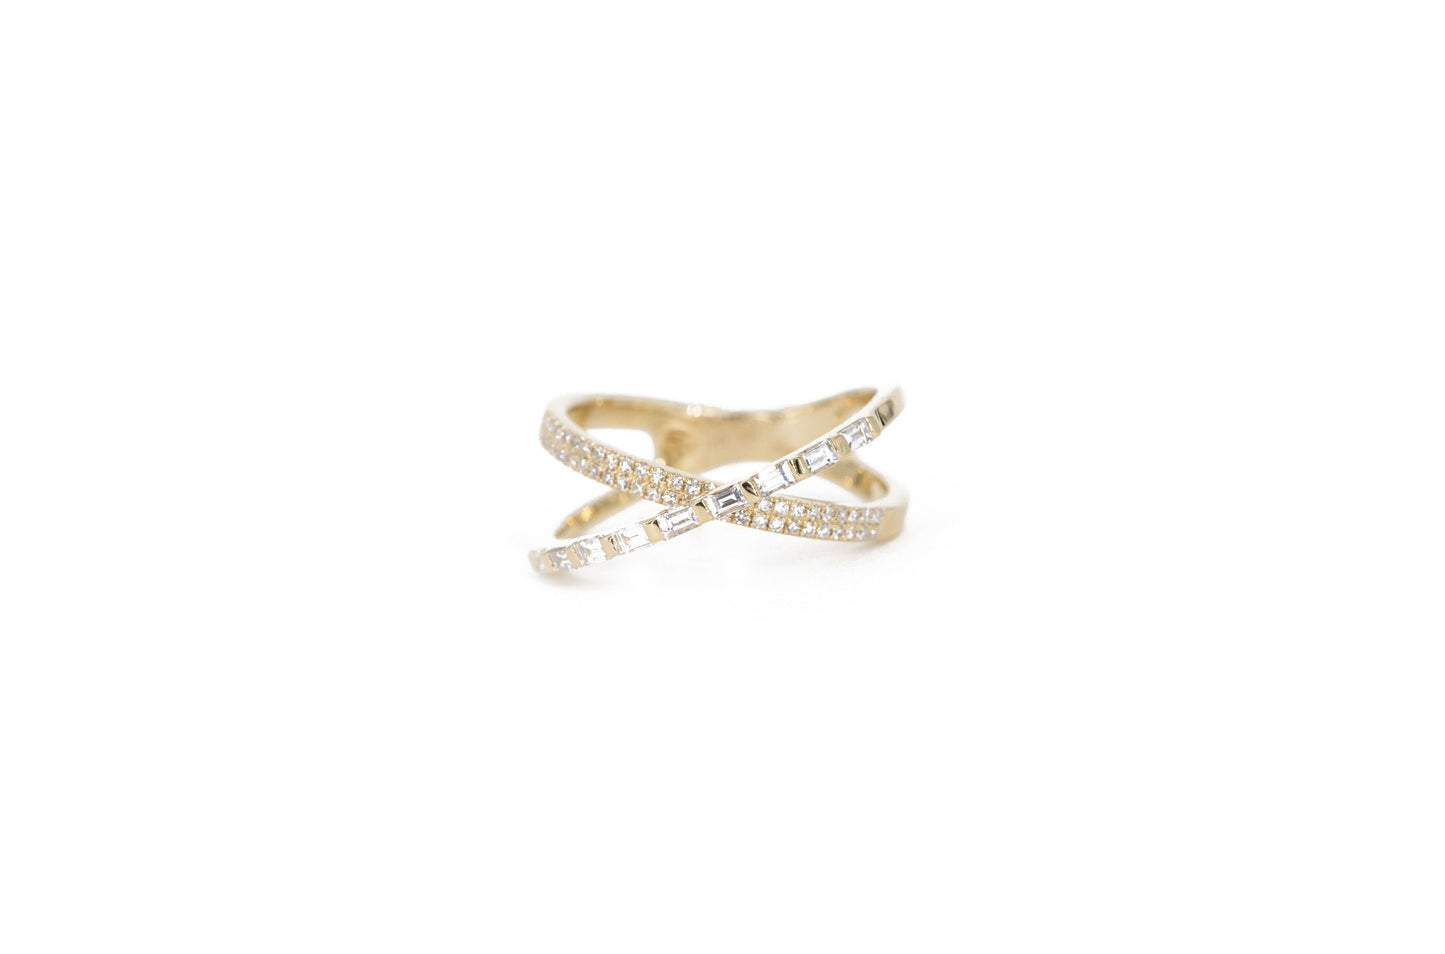 14KT White Gold Diamond Pave and Baguette X Ring